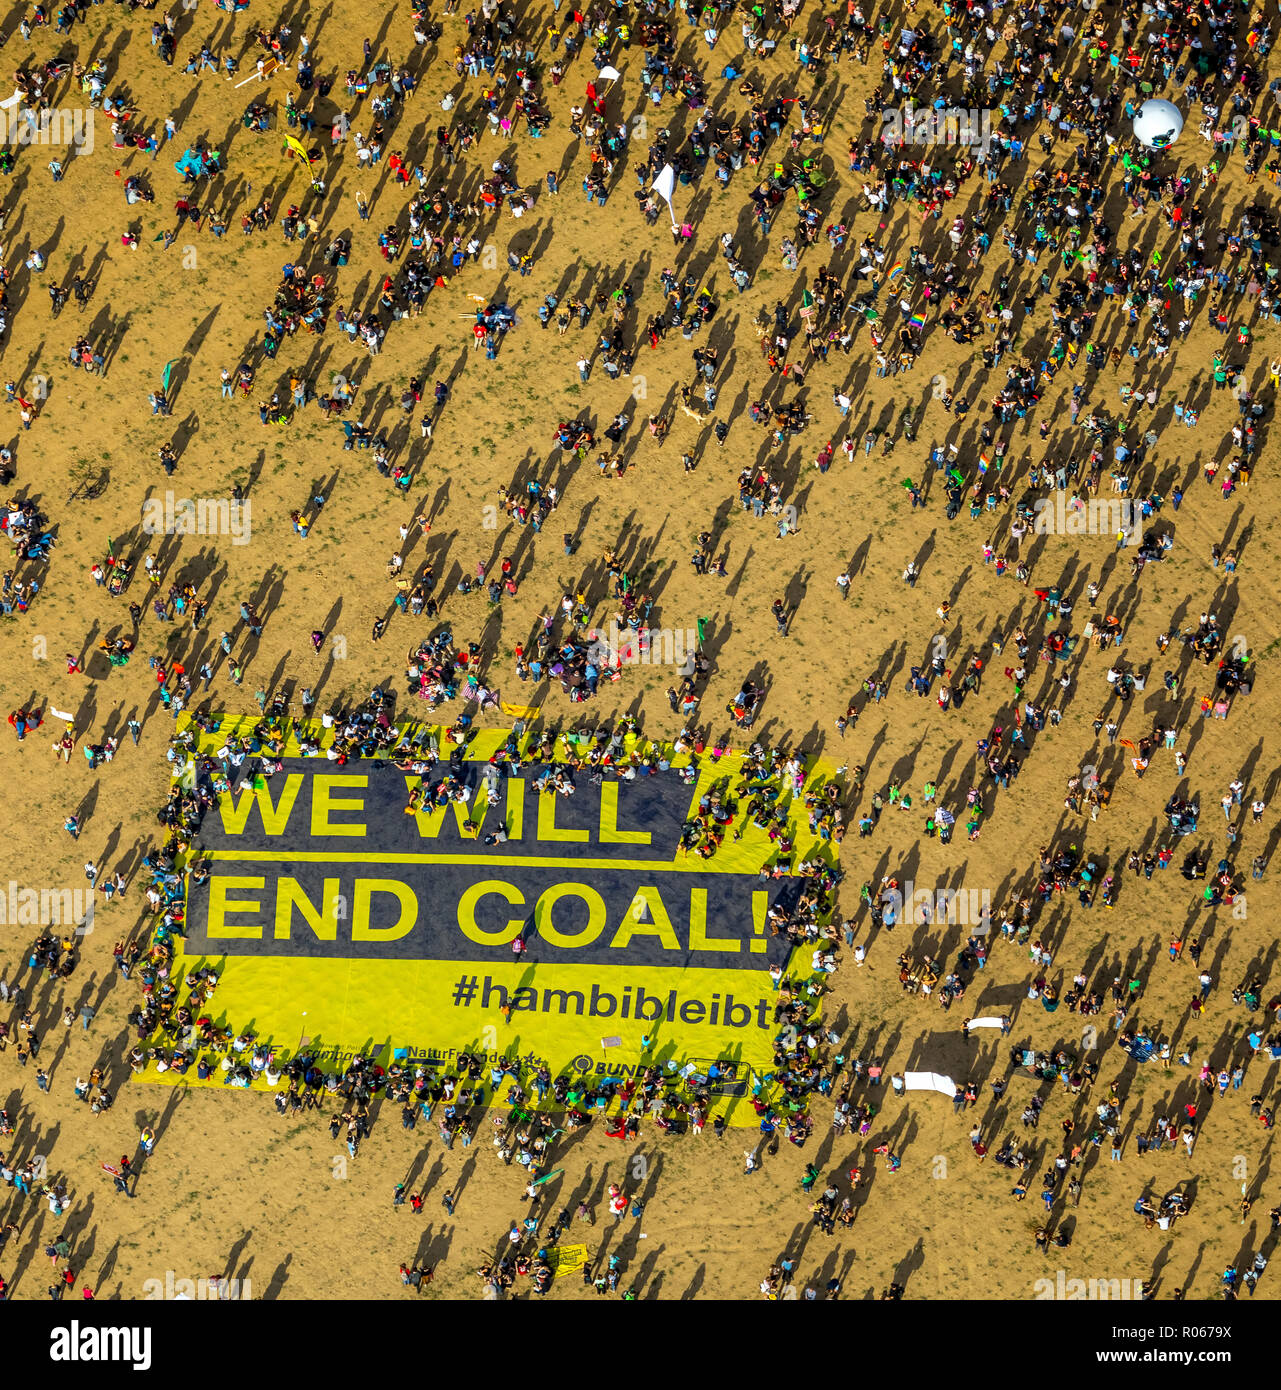 Aerial photo, large demonstration with WE WILL END COAL #hambibleebet banner, against the clearing of the Hambacher forest, Hambach, Hambacher Forst,  Stock Photo